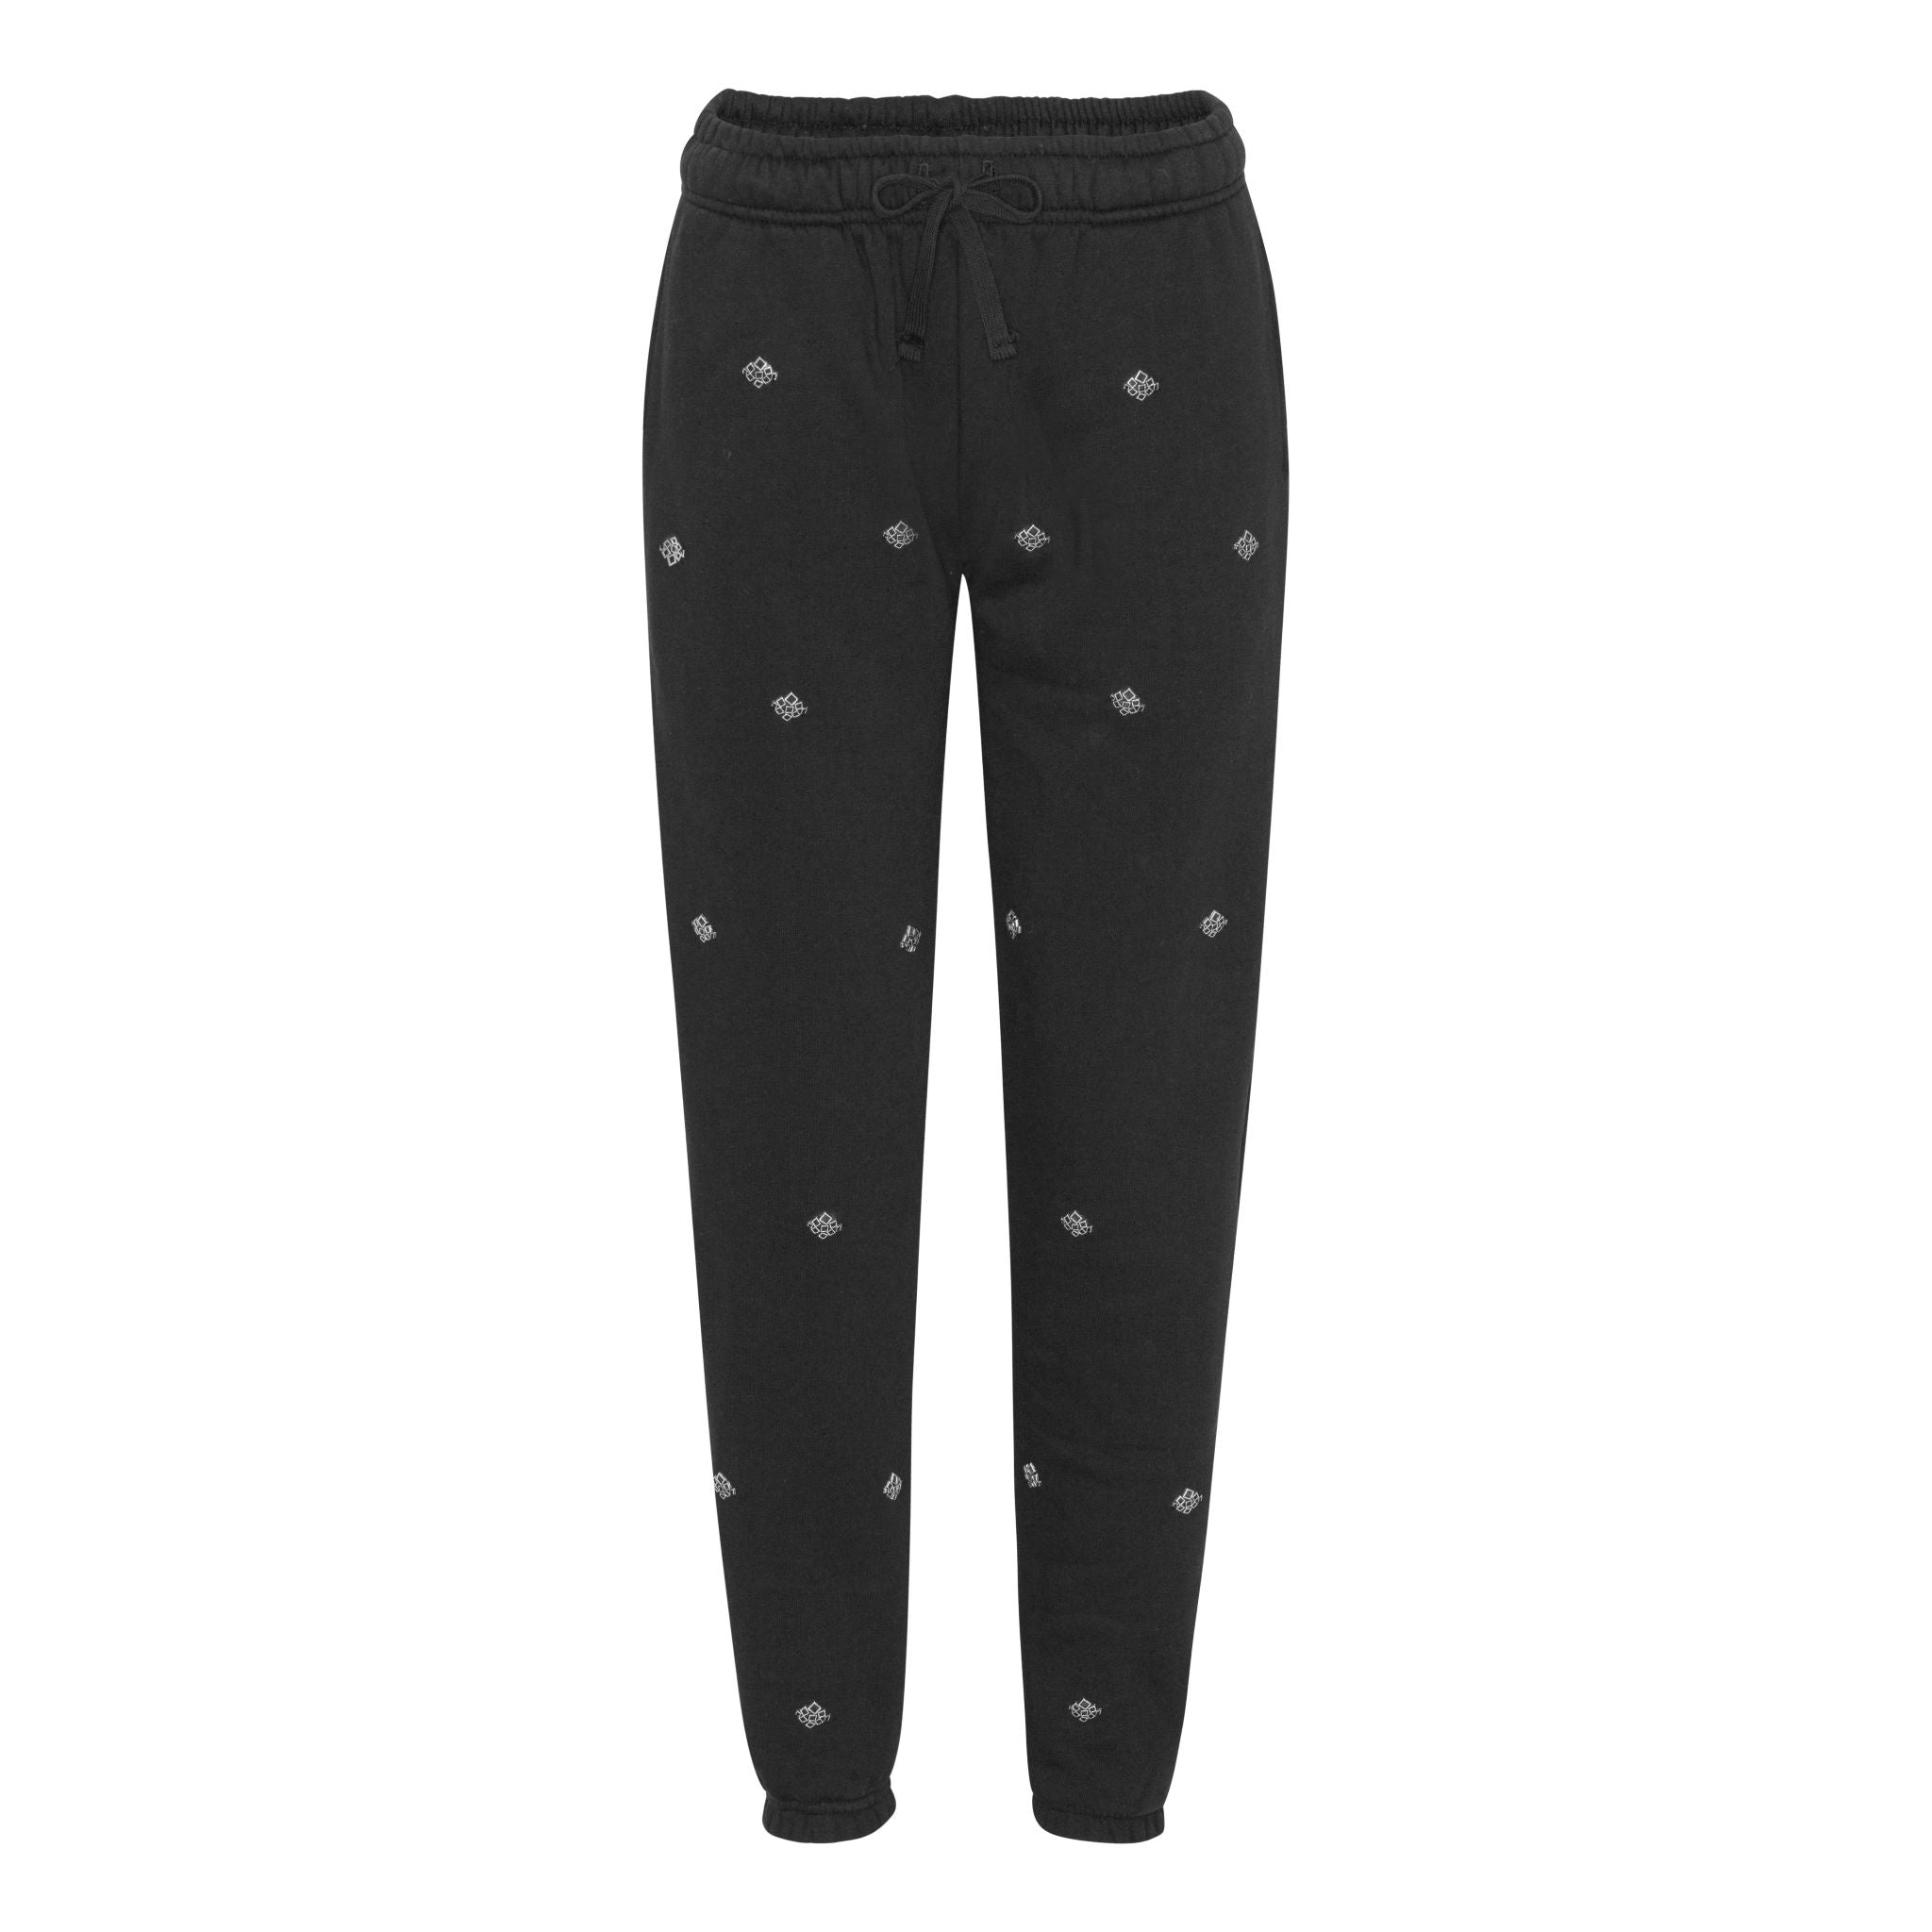 Black sweatpants with silver stones